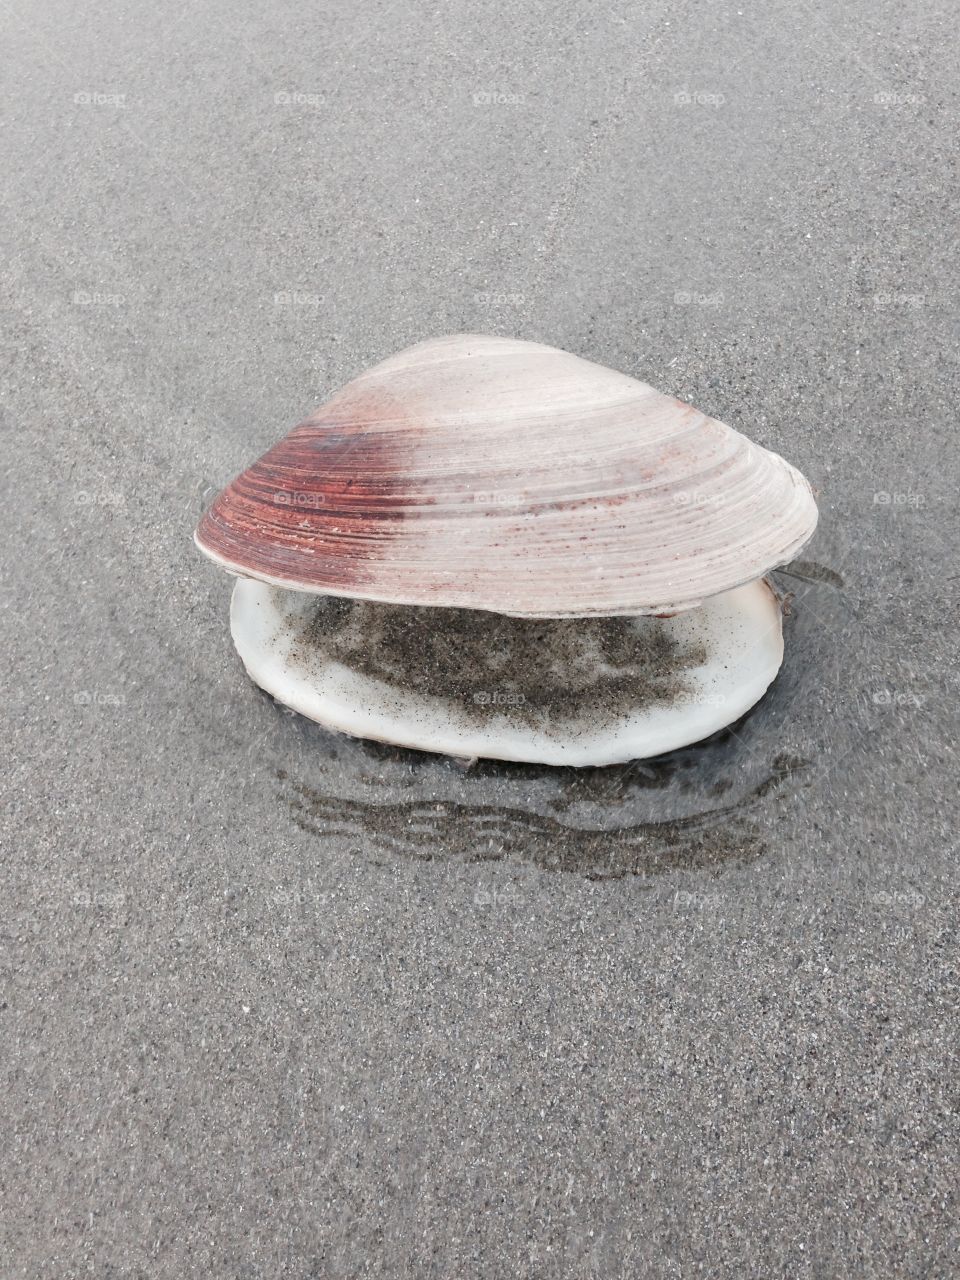 Clam shell. It's fun to come along an intact clam shell